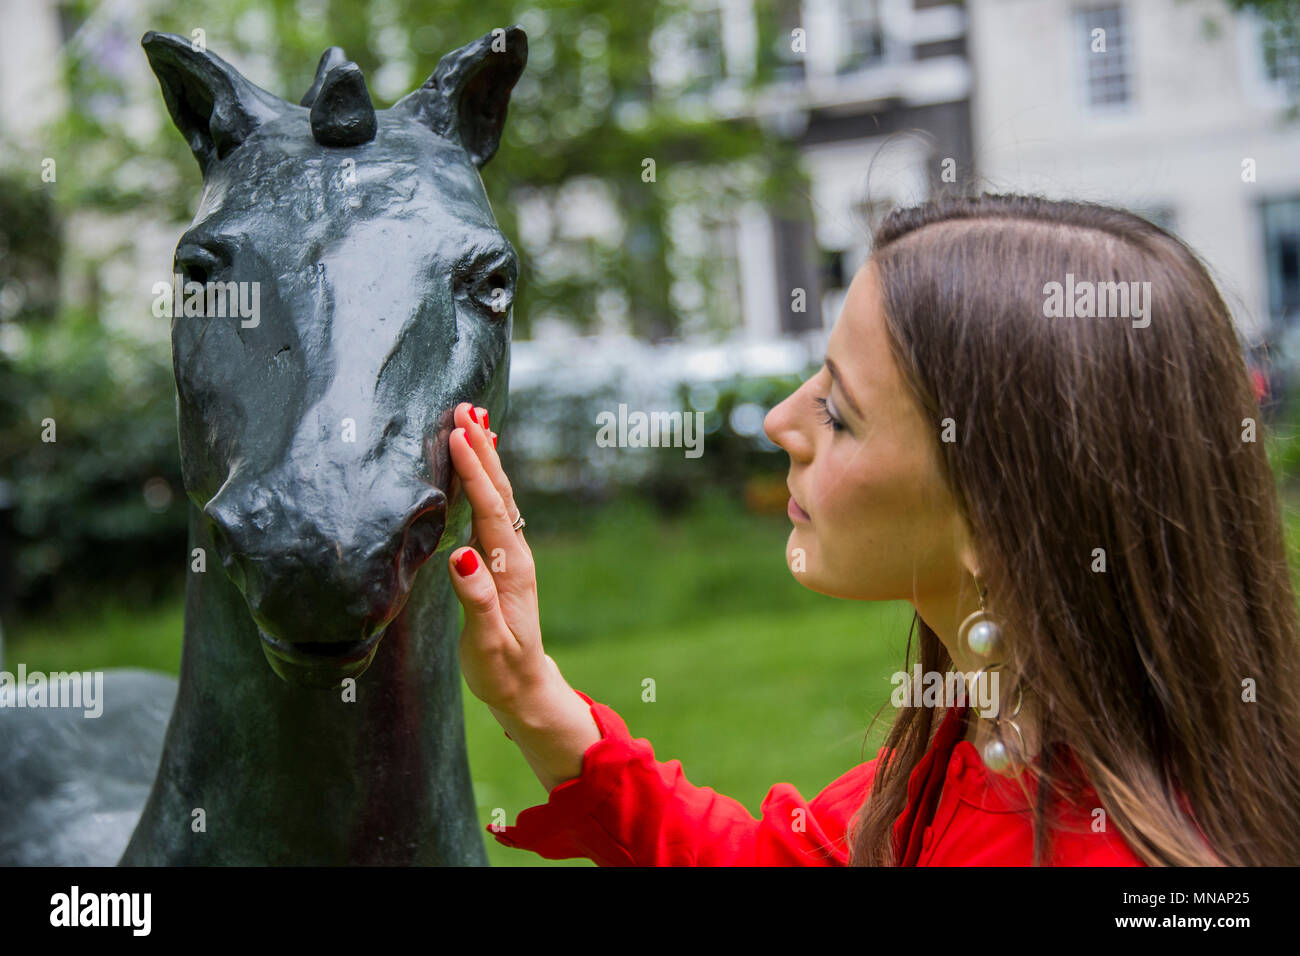 London, UK. 16th May 2018. Barry Flanagan, Field Day 2 (Kore Horse), 1987 - Christie’s will present ‘Sculpture in the Square’ an outdoor sculpture garden set within St James’s Square, London, on view to the public from 17 May to 20 June 2018. Credit: Guy Bell/Alamy Live News Stock Photo